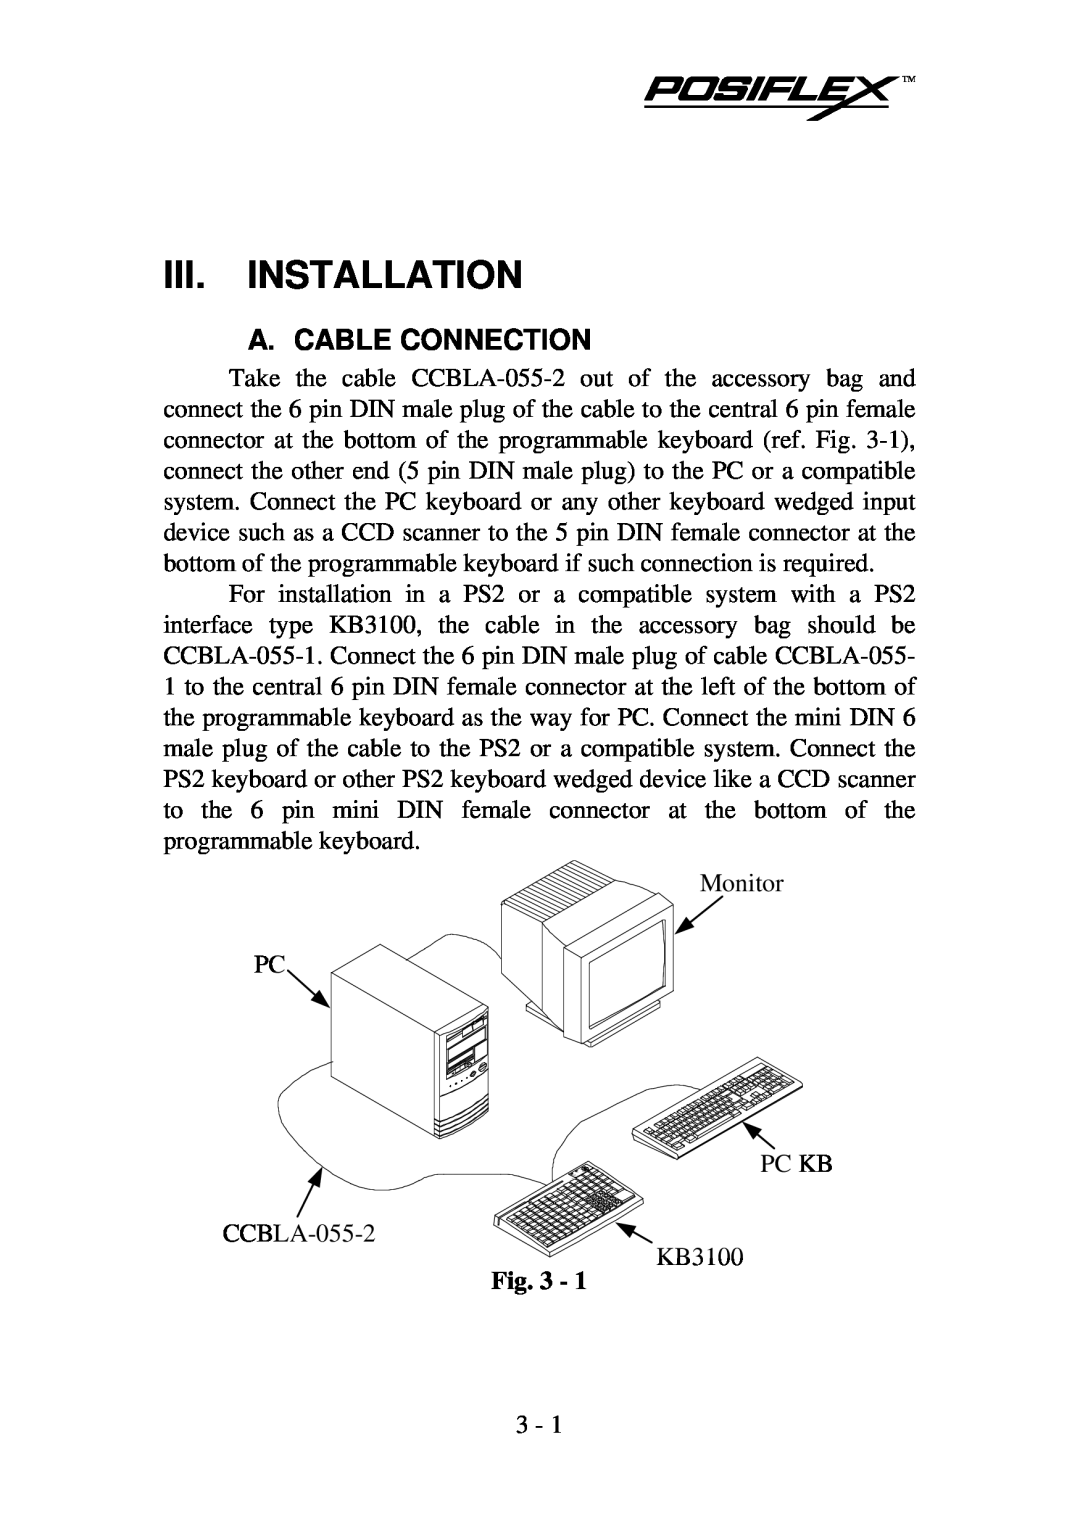 Mustek KB3100 user manual Iii. Installation, A. Cable Connection 